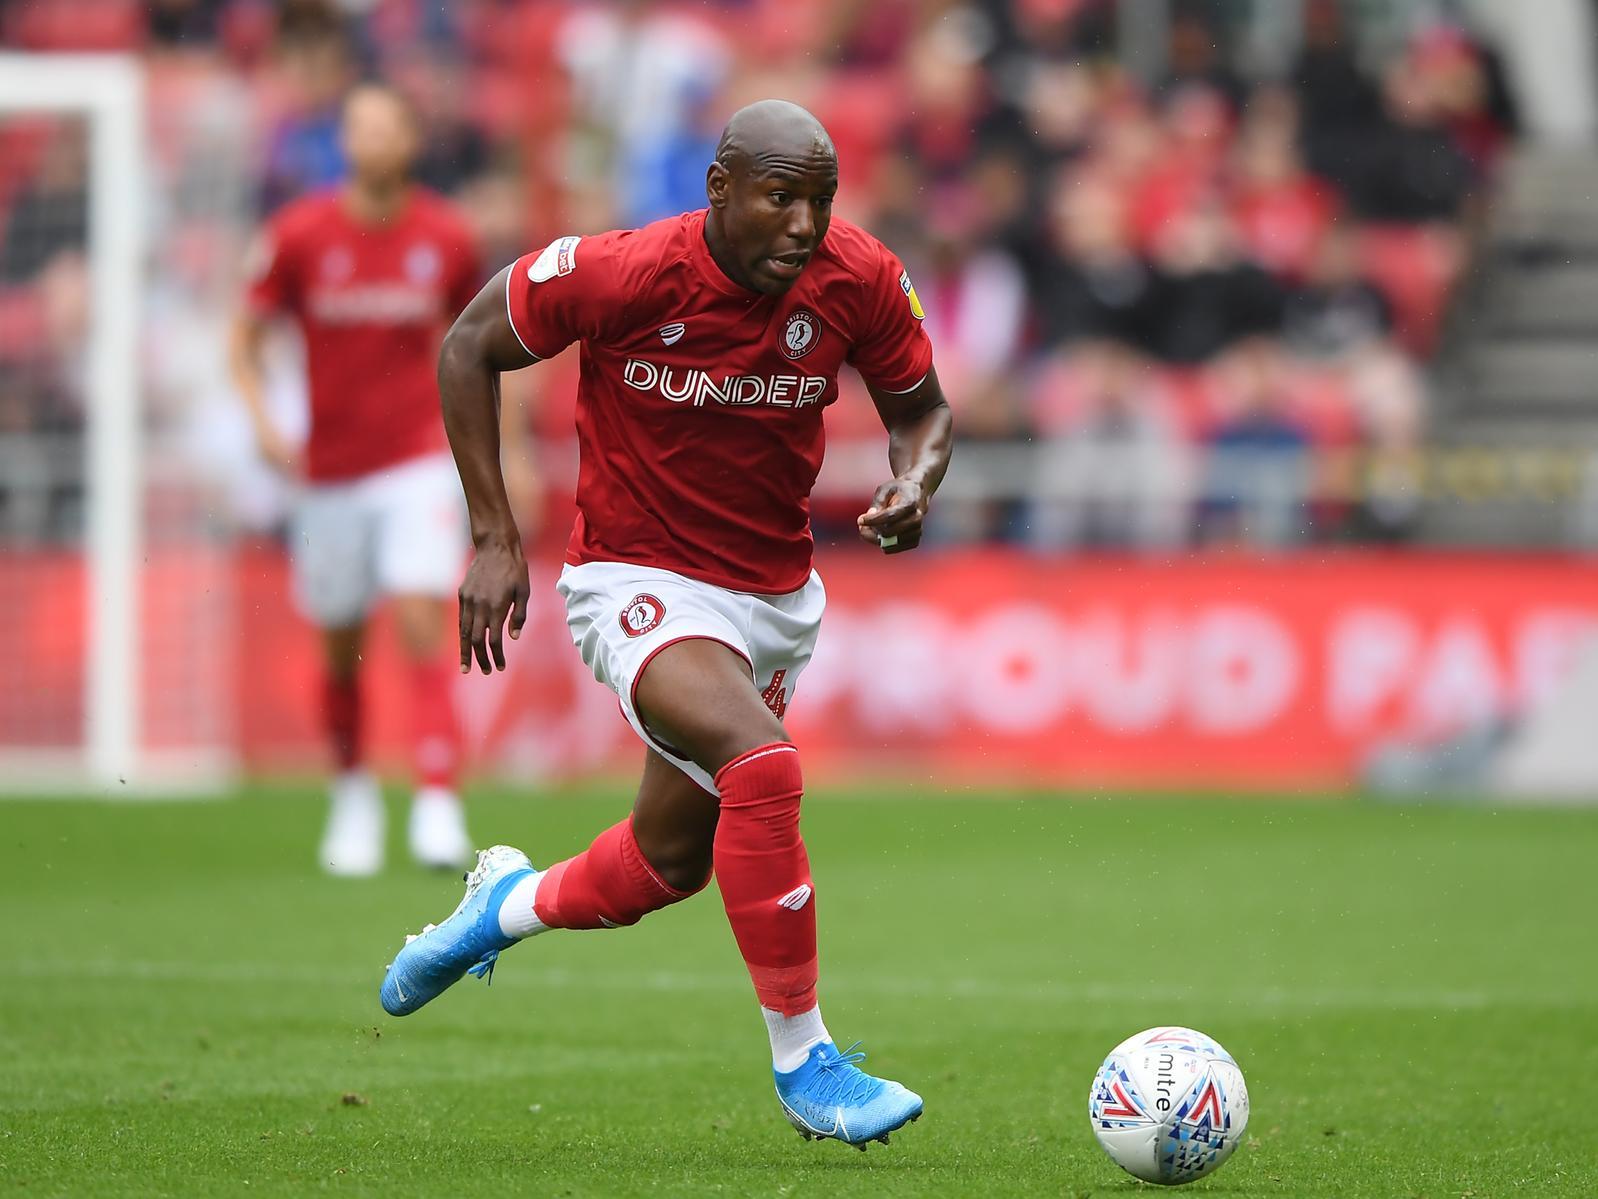 Stoke City striker Benik Afobe has revealed that he's back in training with loan club Bristol City, six months after a brutal ACL injury looked to have prematurely ended his season. (Bristol Post)